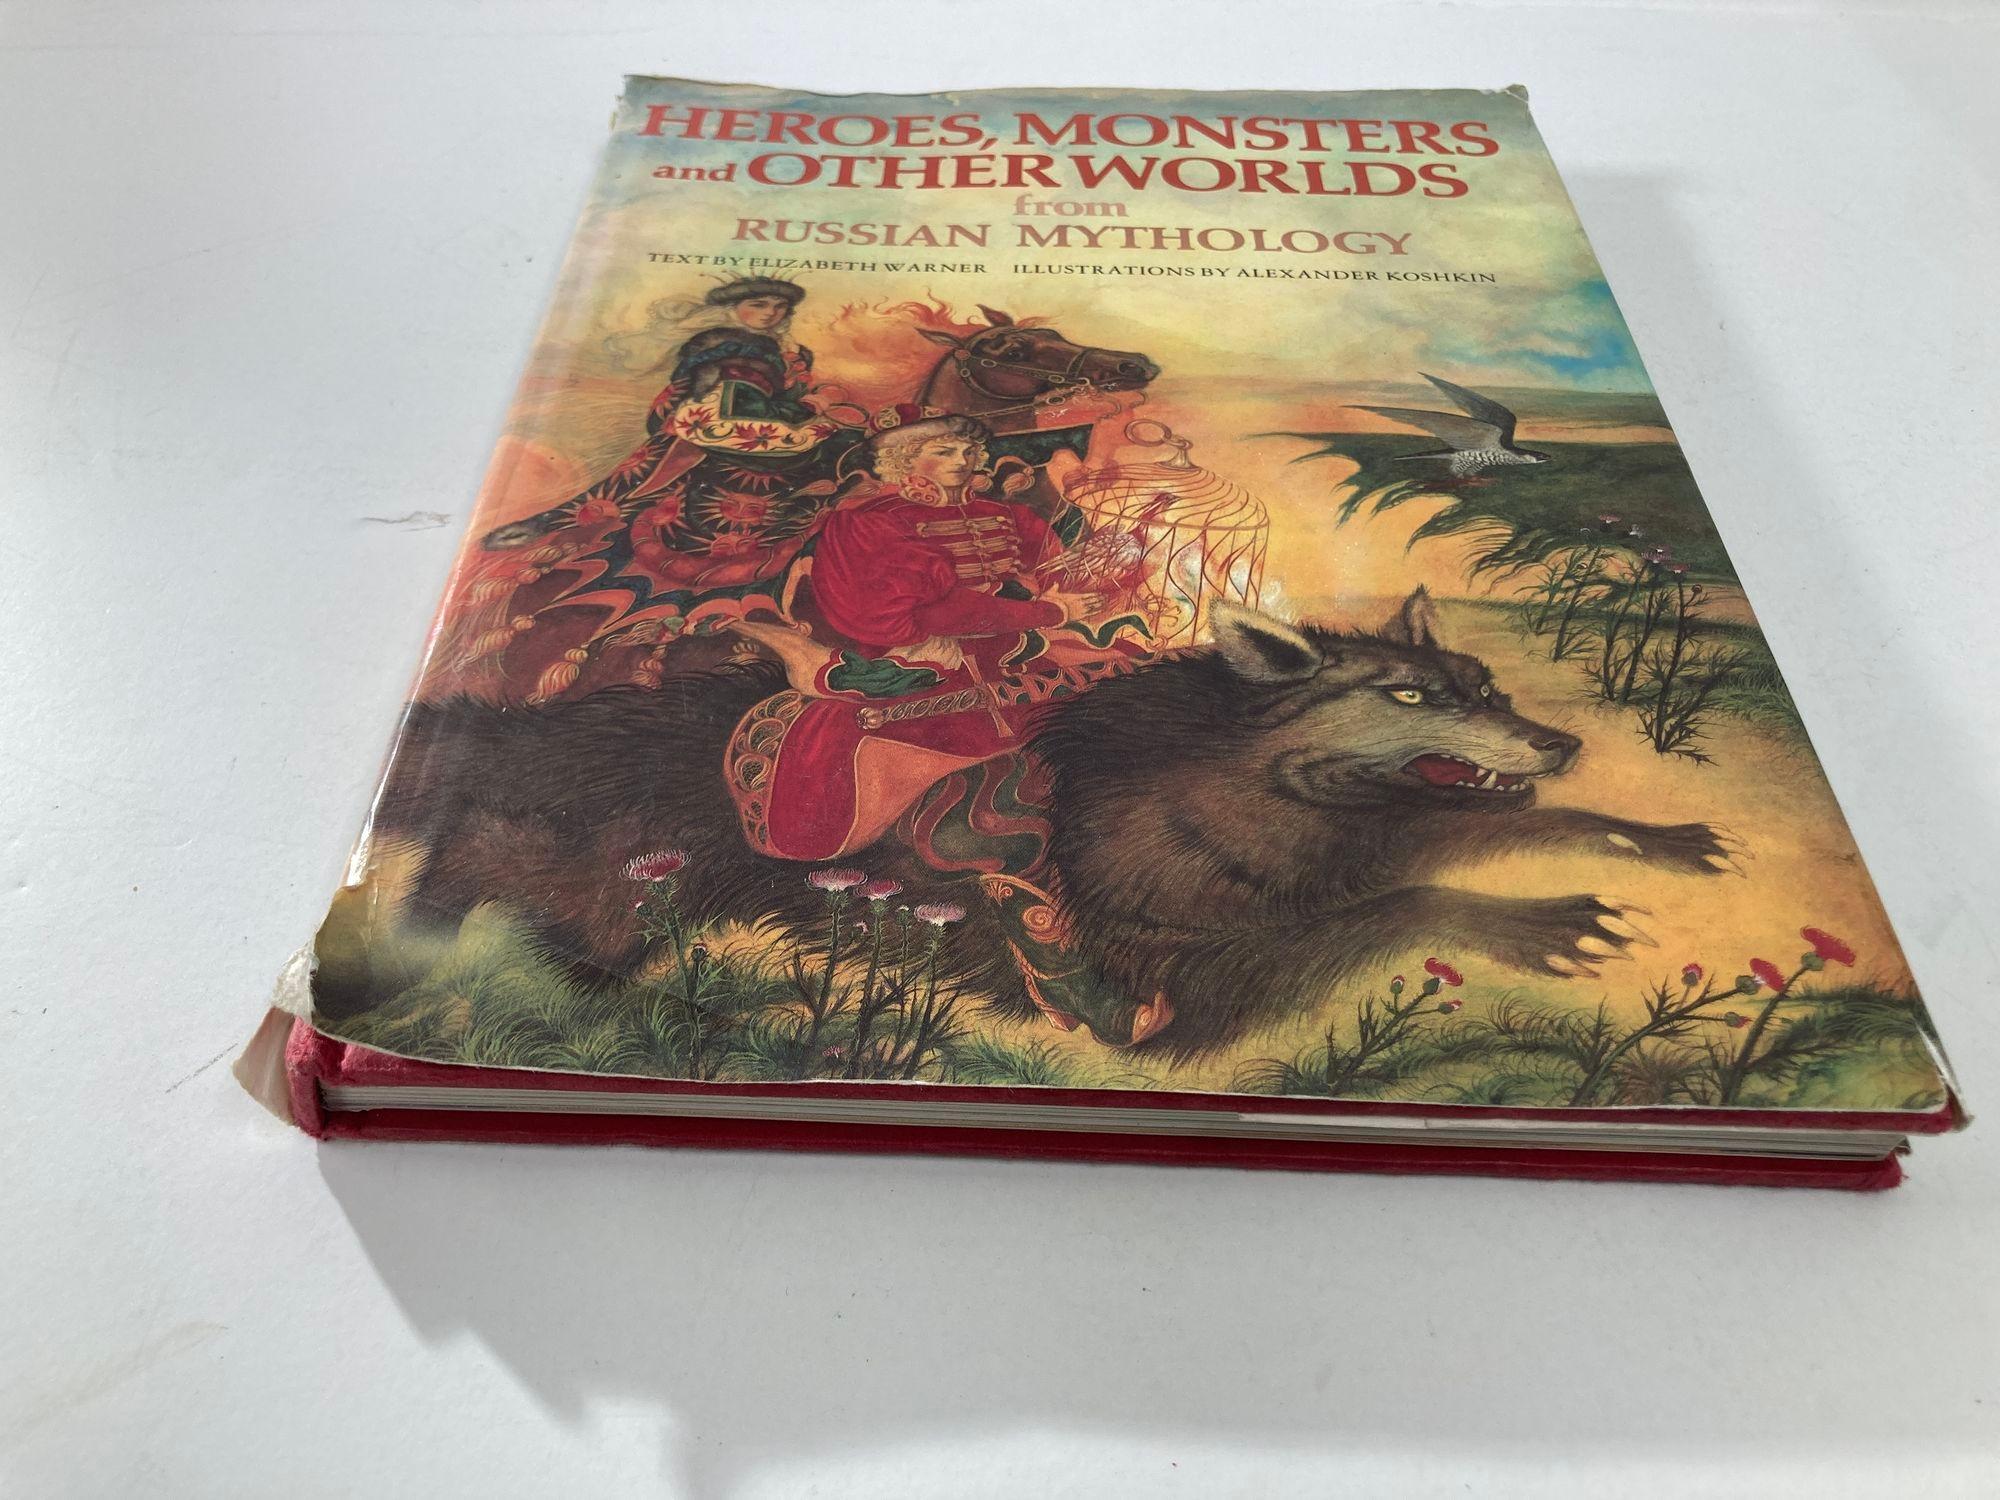 Heroes, Monsters and Other Worlds from Russian Mythology.
by Warner, Elizabeth & Alexander Koshkin.
Published by Schocken Books., New York., 1985. 1st printing, 1st edition.
Illustrated in black, white and color by Alexander Koshkin. Important